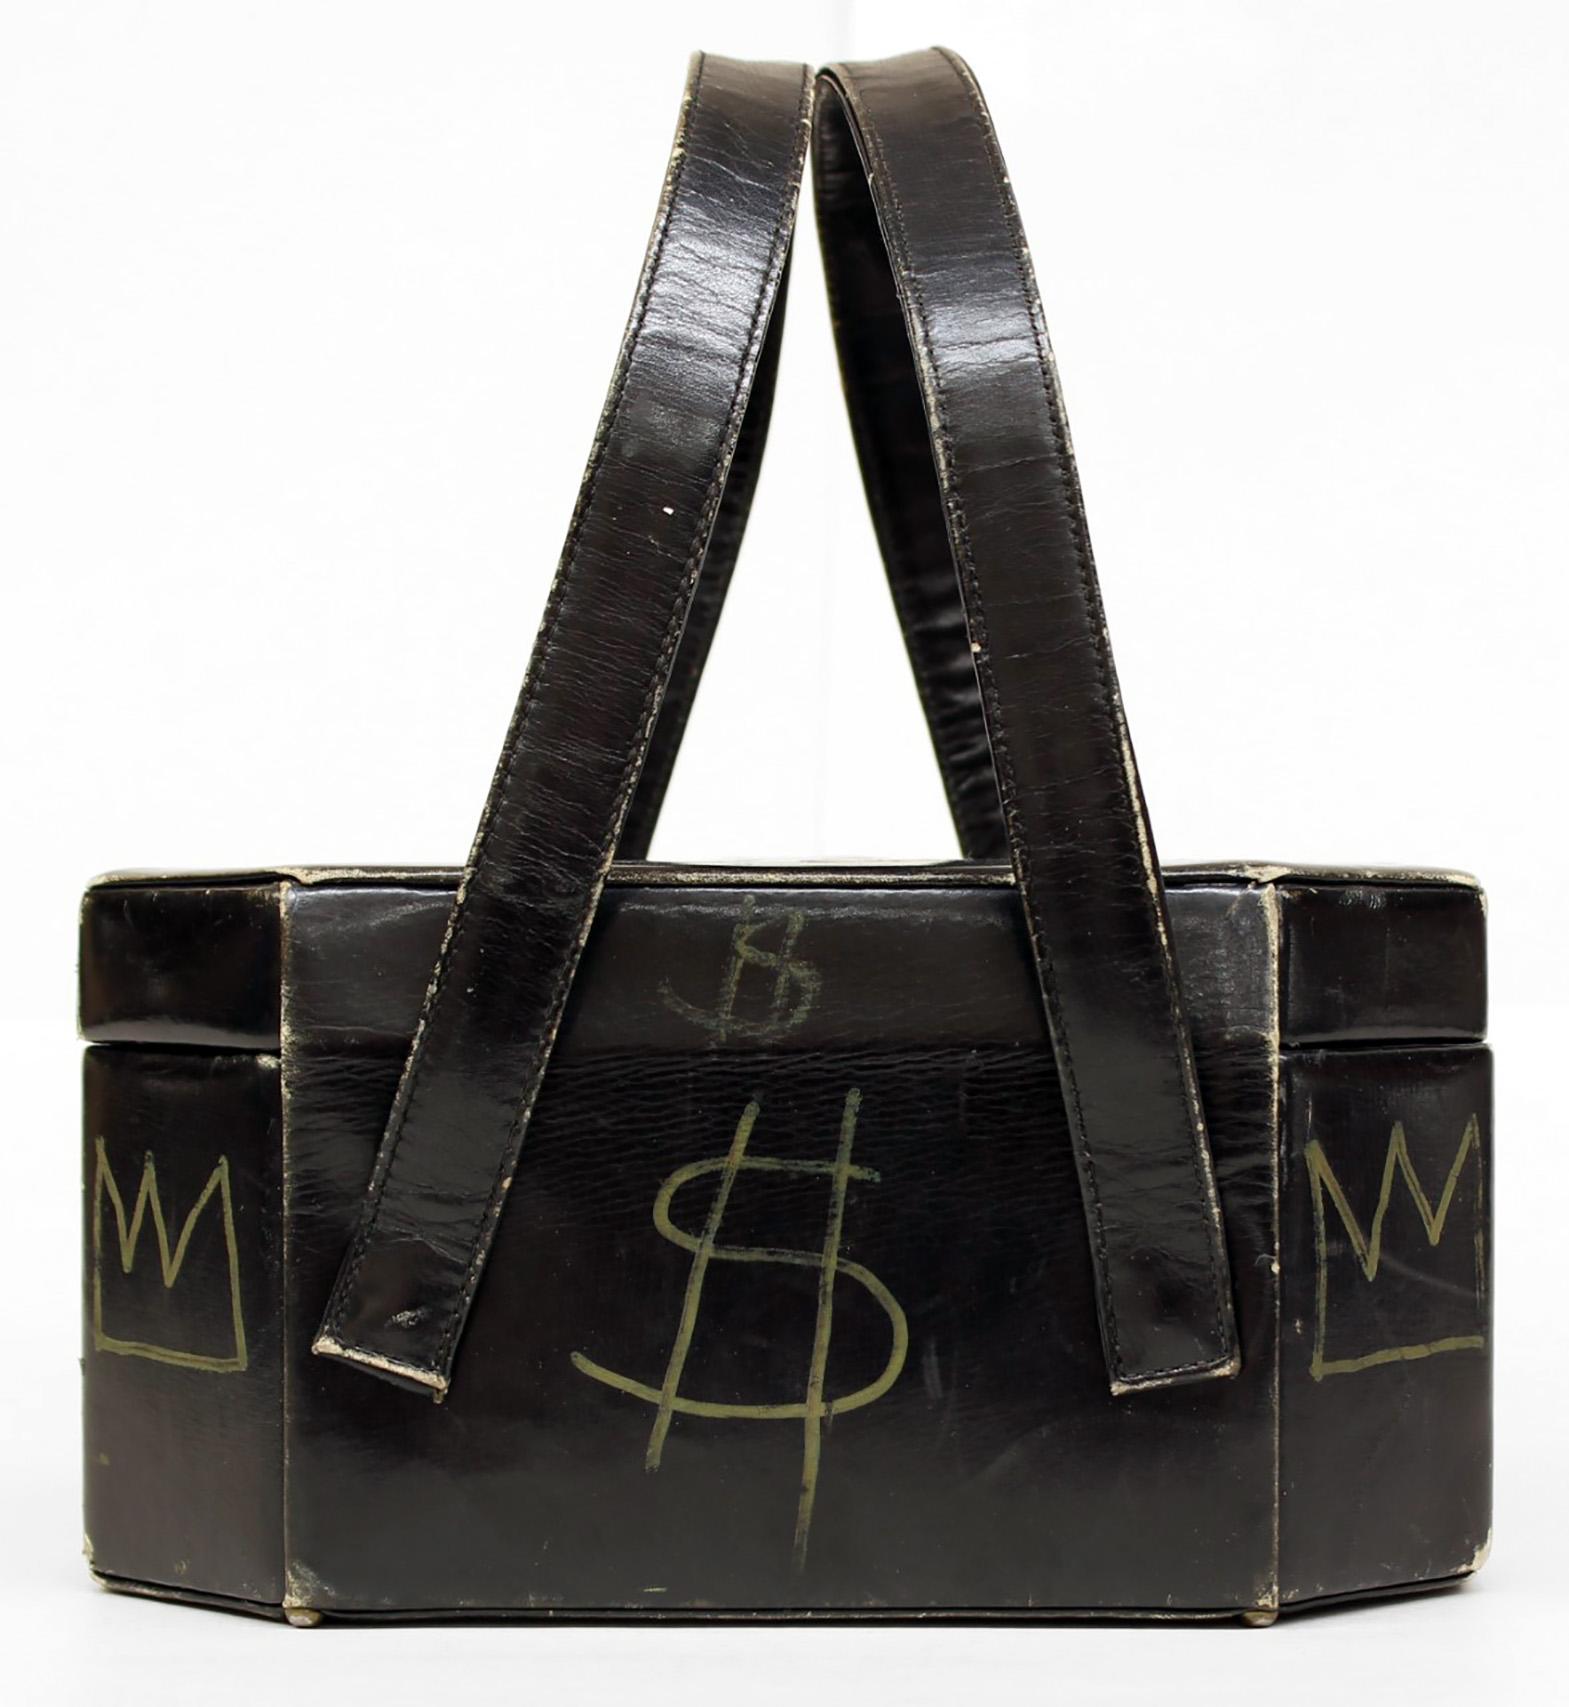 Jean-Michel Basquiat, Andy Warhol (untitled) 'Purse' 1984:
With dollar signs drawn by Warhol and with crowns and 